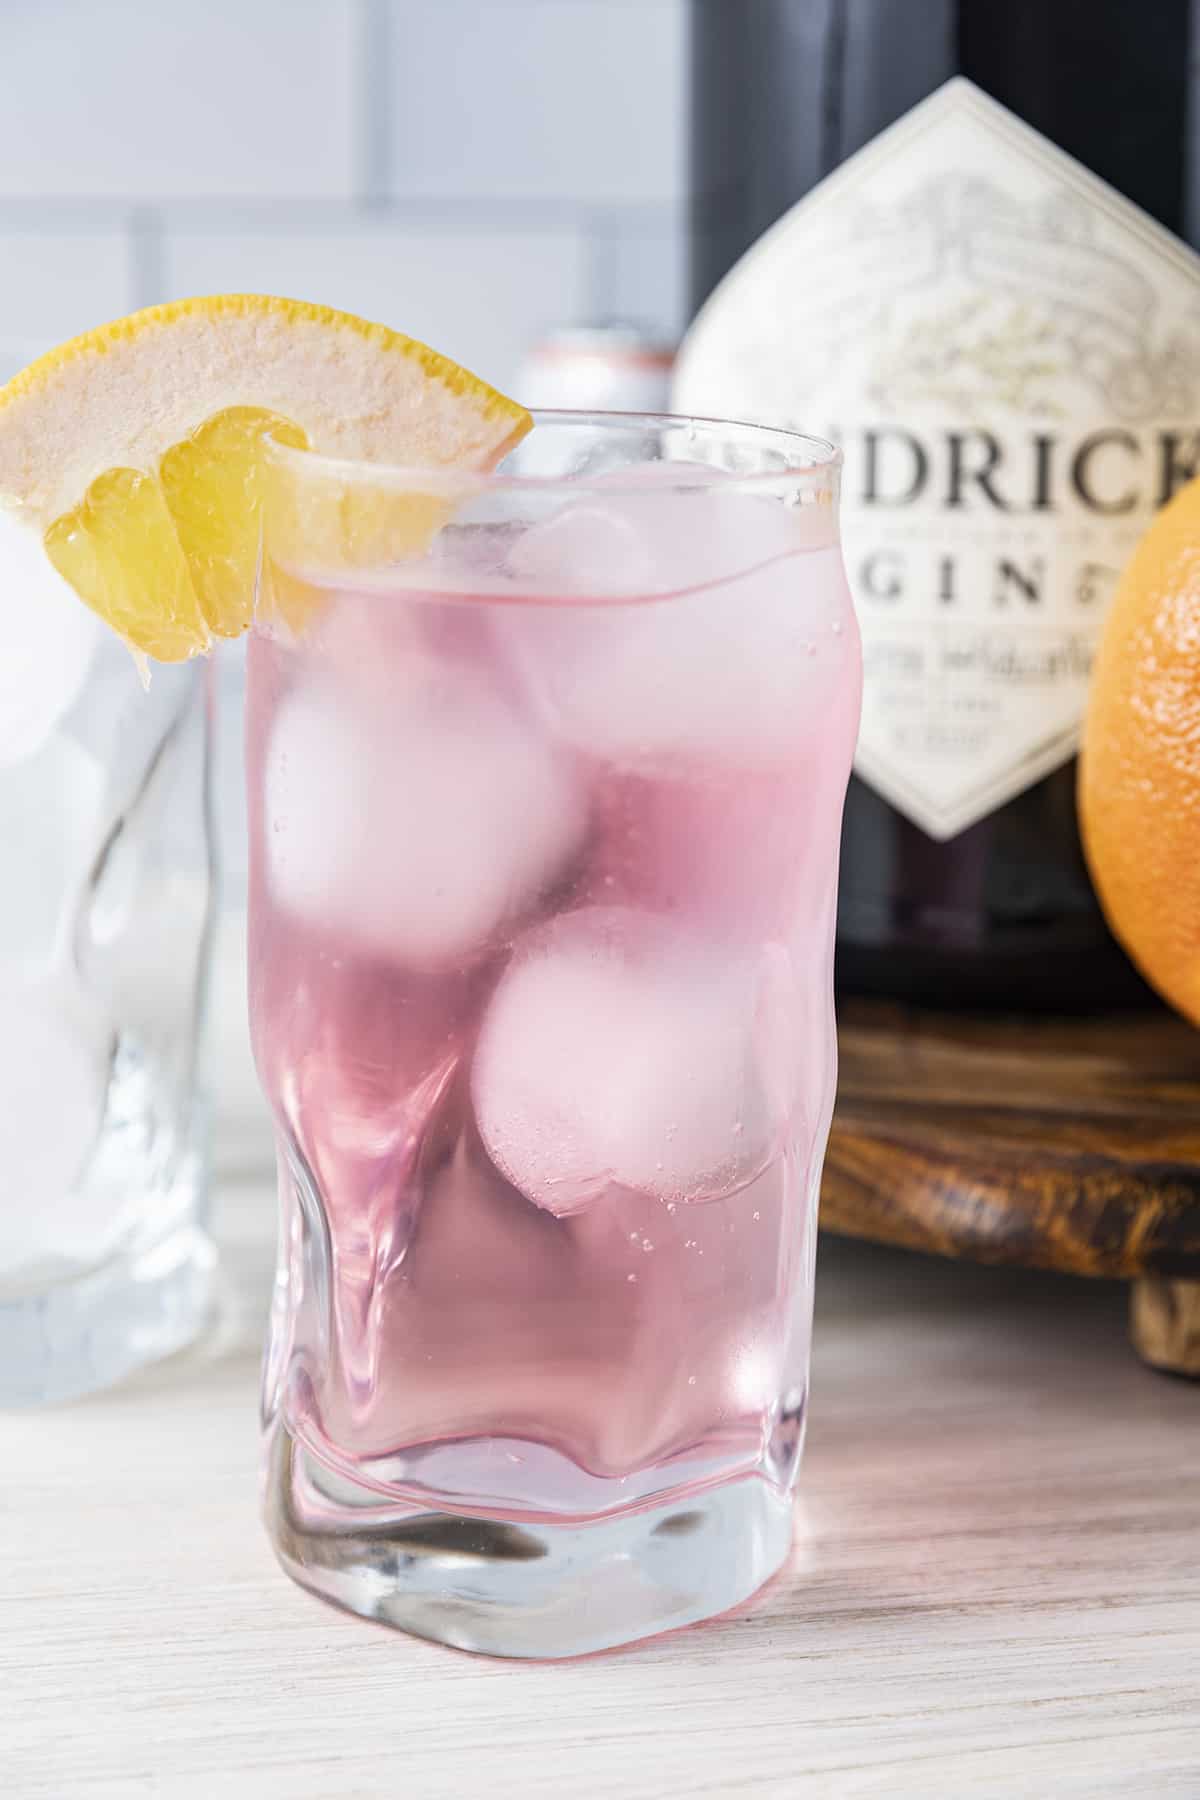 Citrus soda & gin combine in a Finnish Long Drink; an ultra-refreshing tipple with a fun history that's unbelievably easy to make and drink!